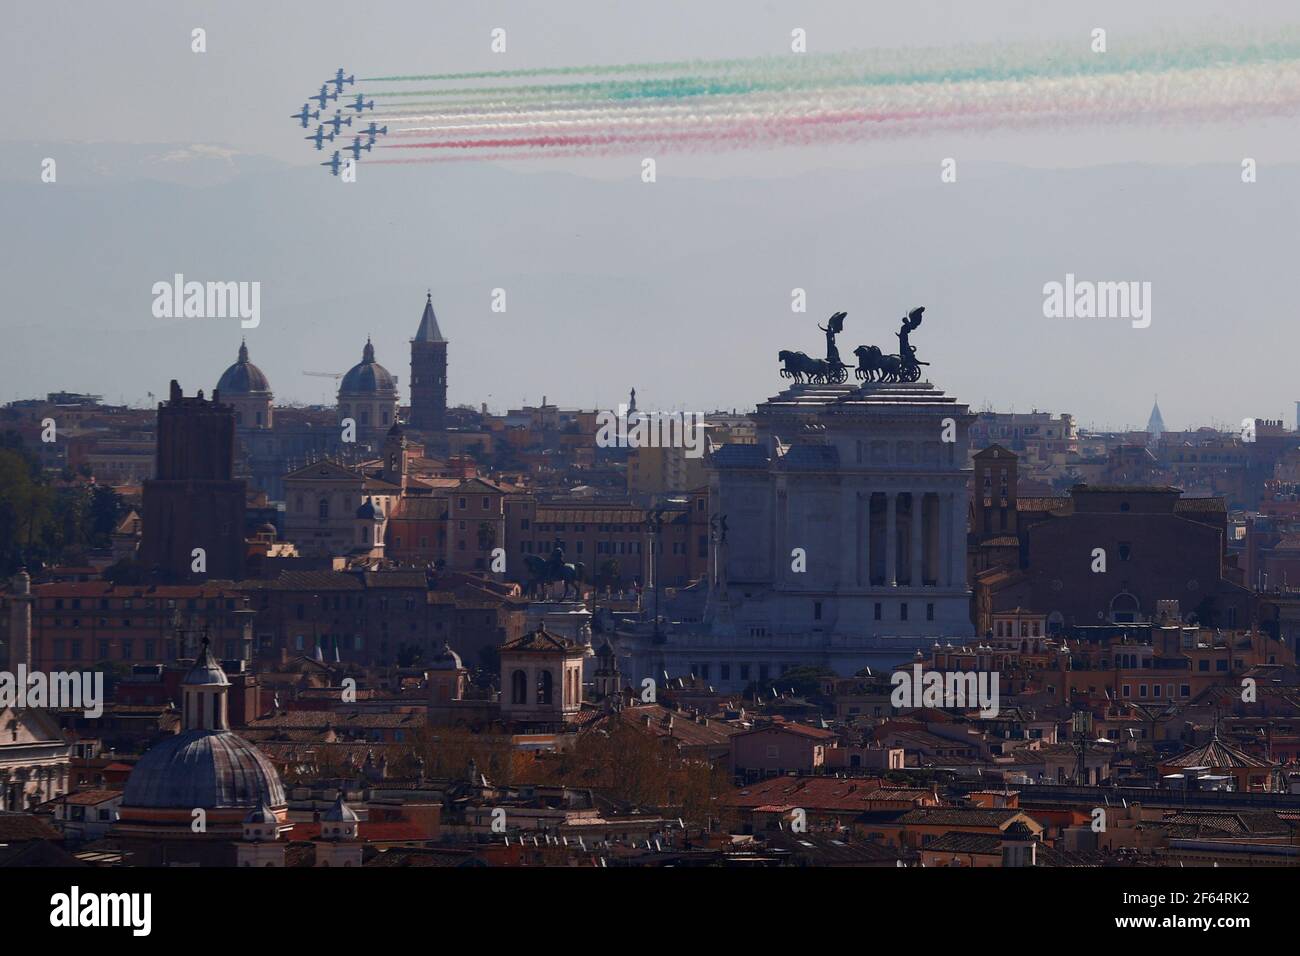 Italy's acrobatic Air Force squadron blaze the colours of the Italian flag over the capital as they celebrate the 98th anniversary of the establishment of the Air Force, in Rome, Italy, March 30, 2021. REUTERS/Guglielmo Mangiapane Stock Photo